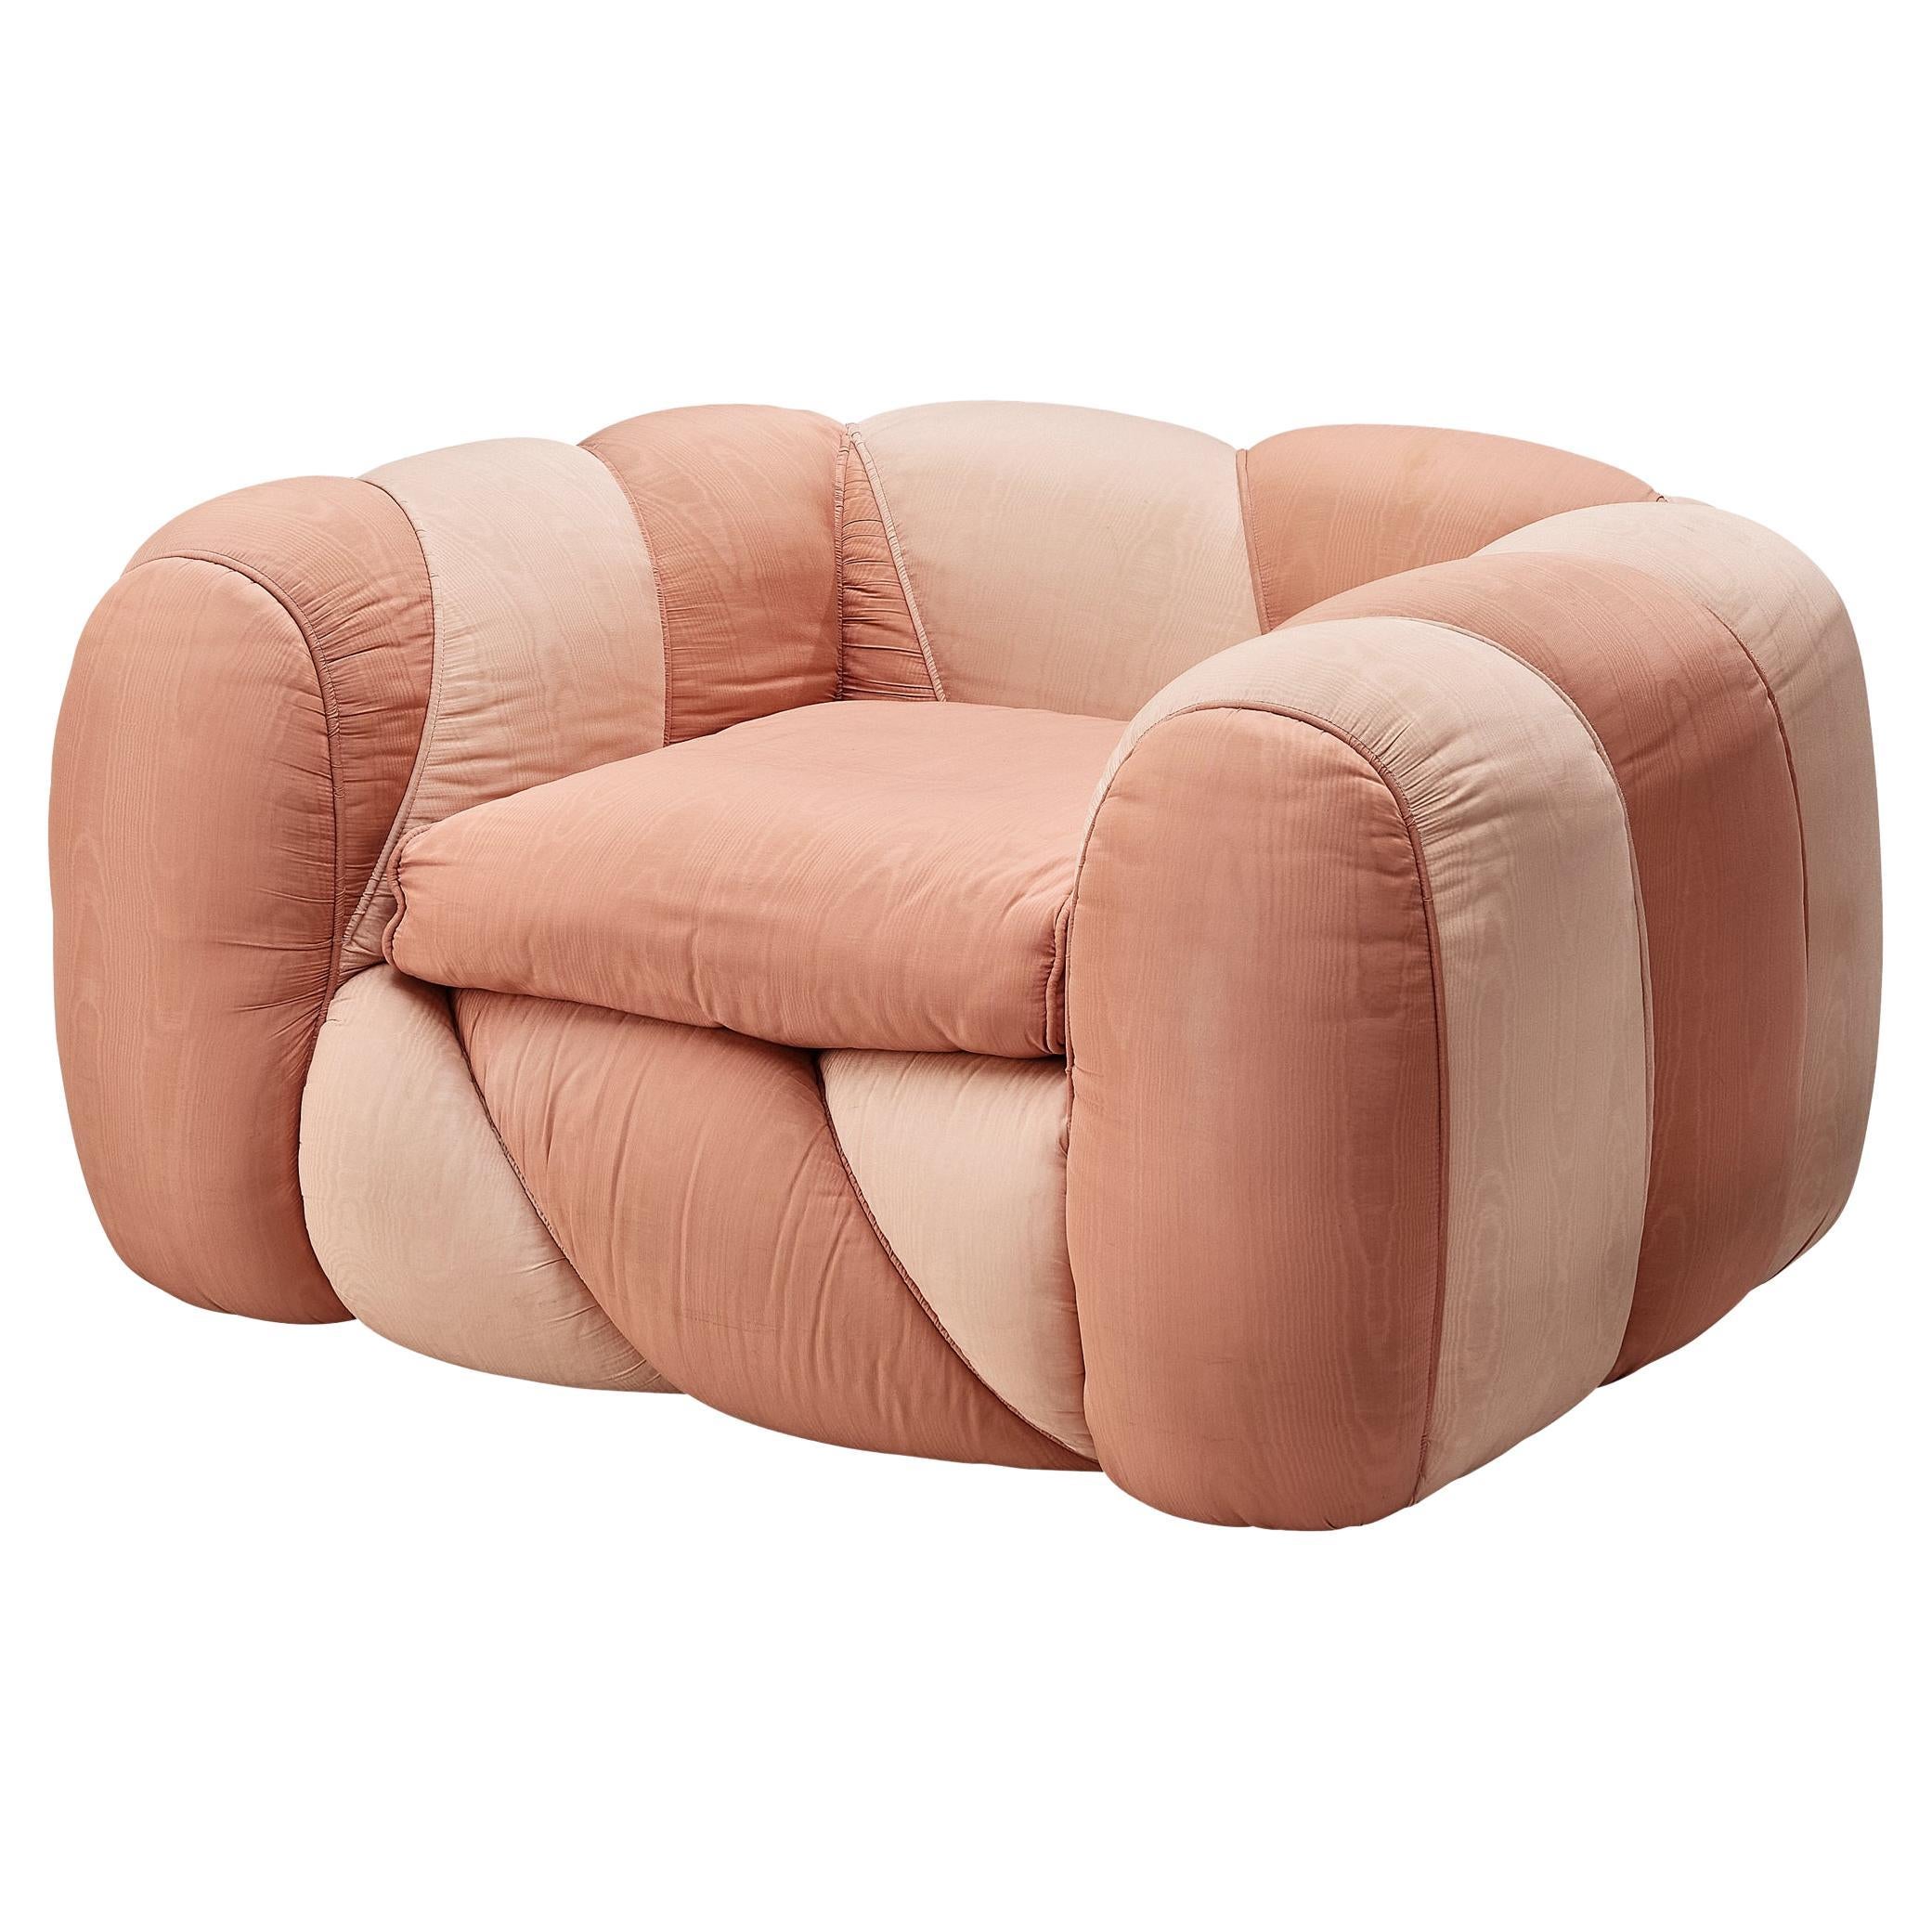 Vivai del Sud Lounge Chair in Pink Fabric Upholstery  For Sale